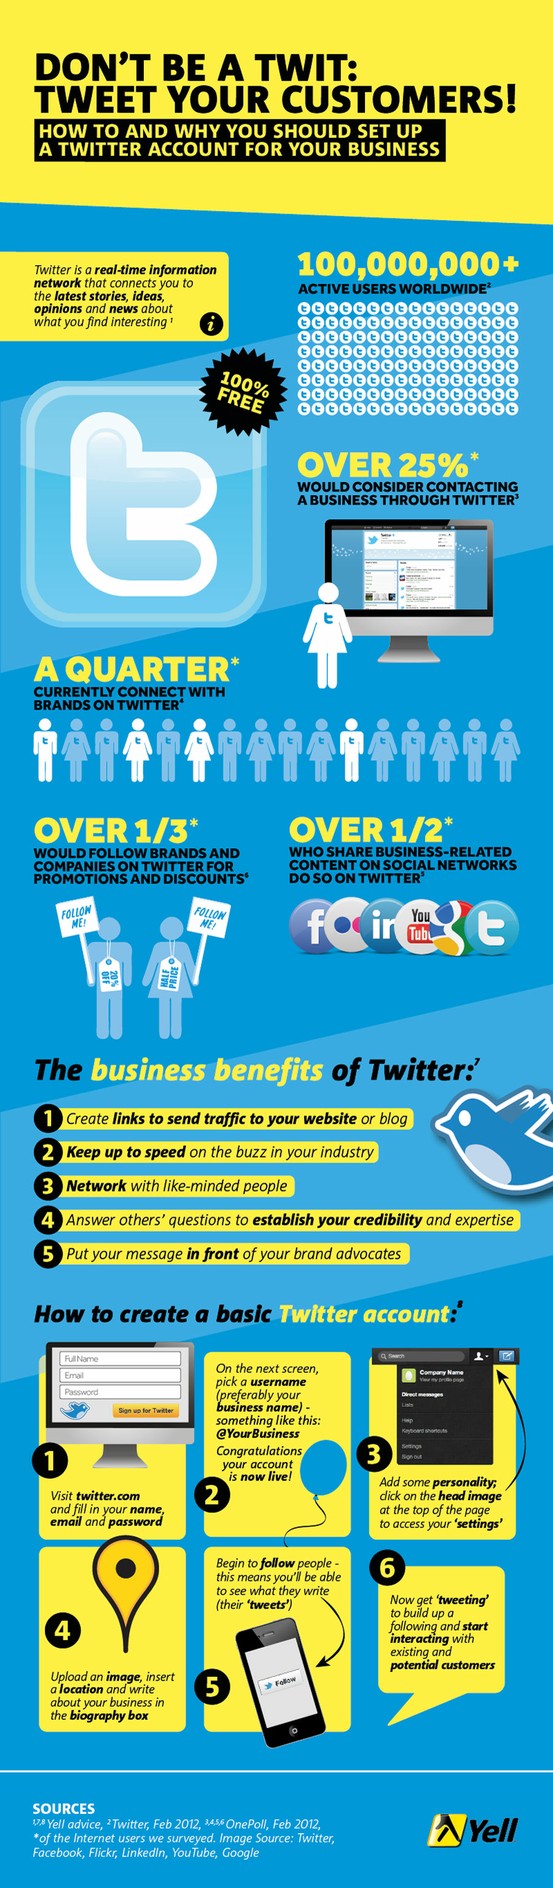 How and why you should set up a business account on Twitter